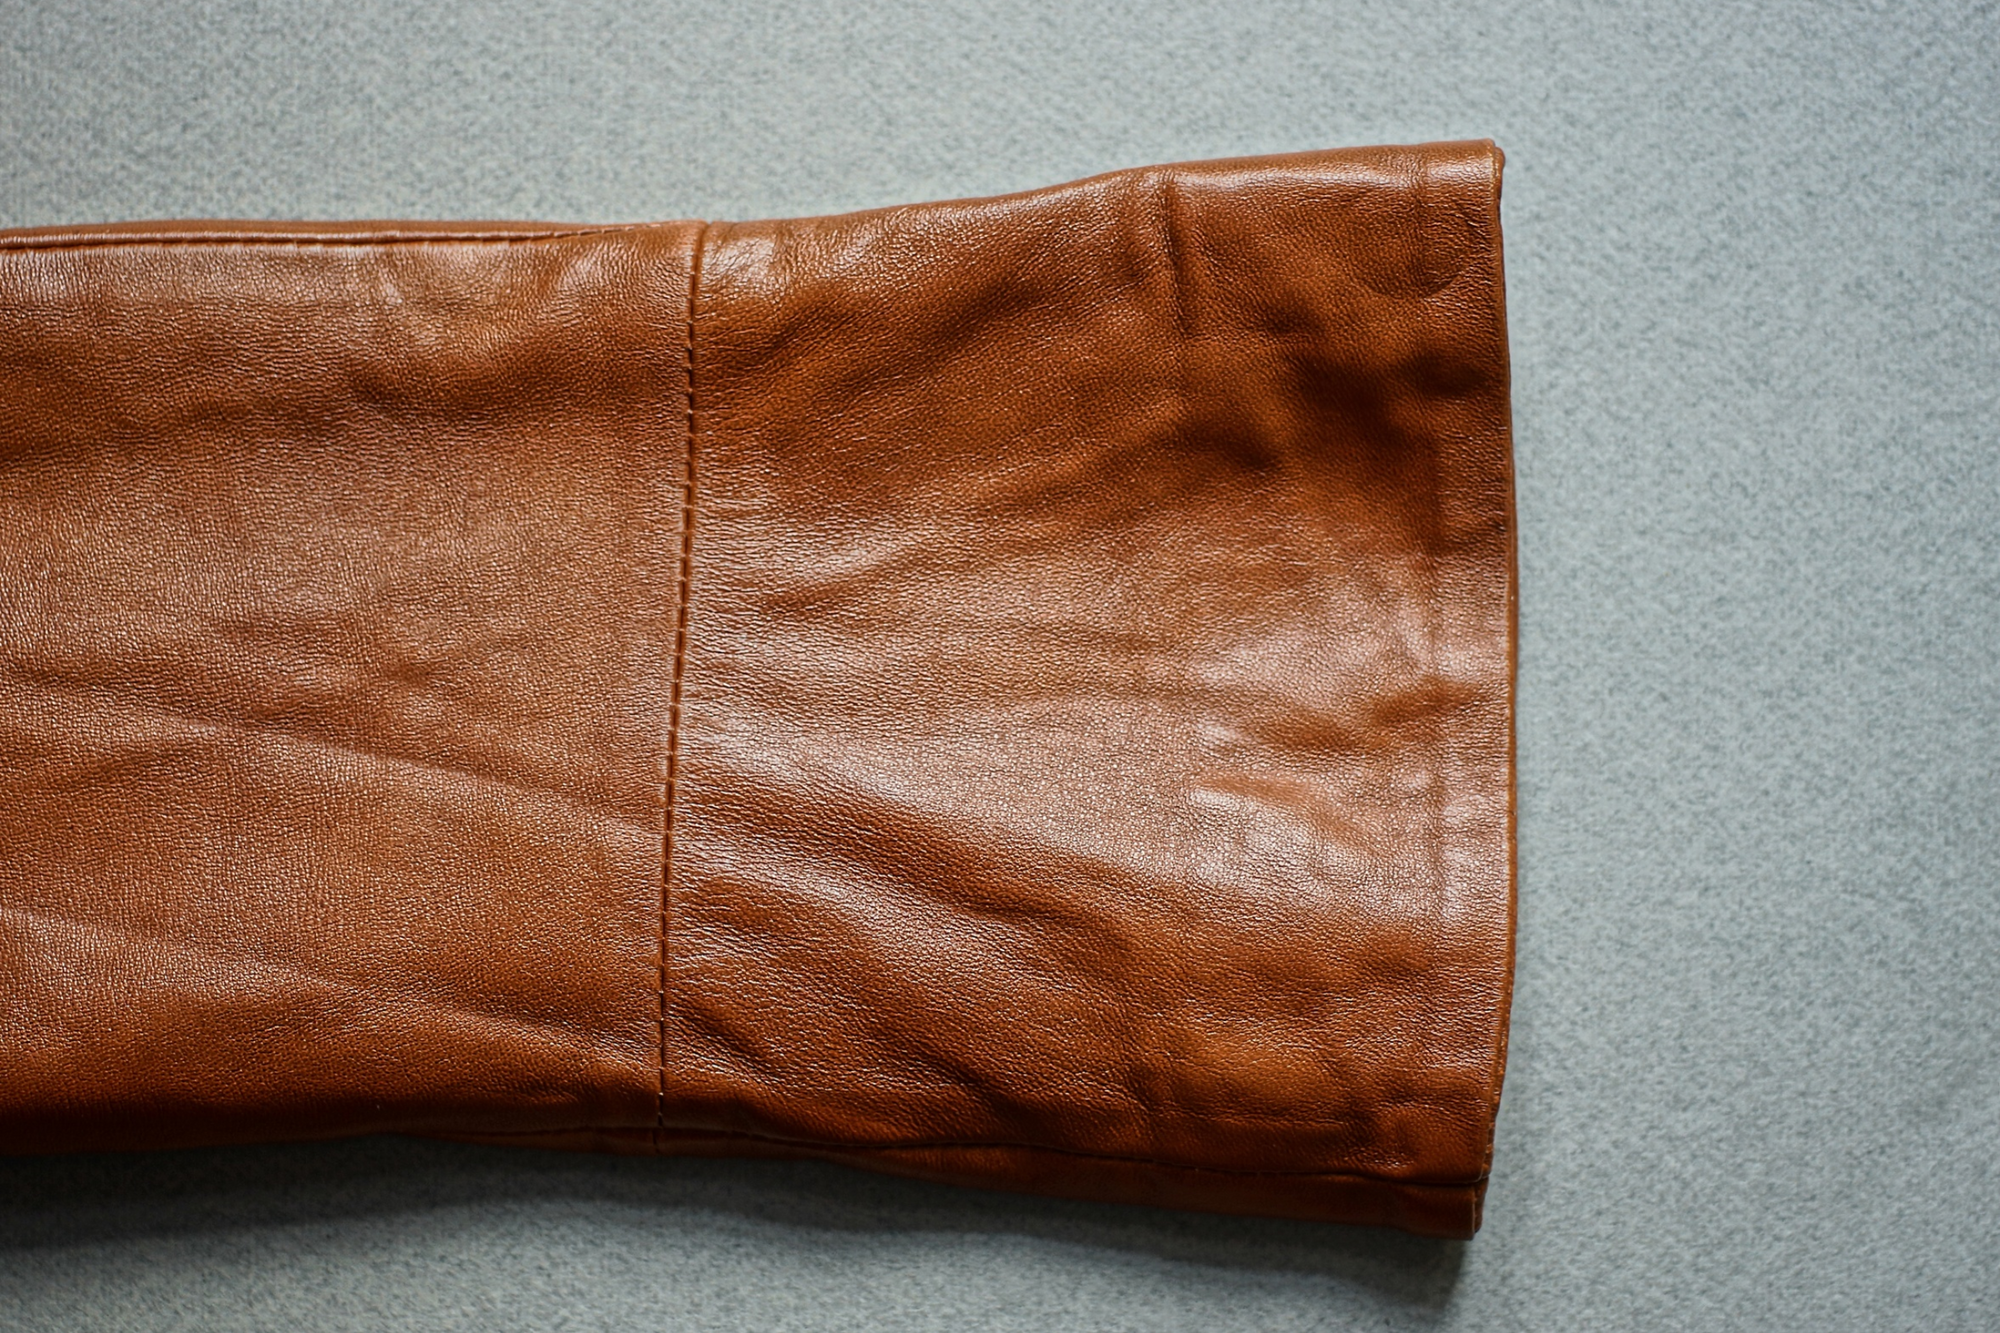 Disinfecting Leather